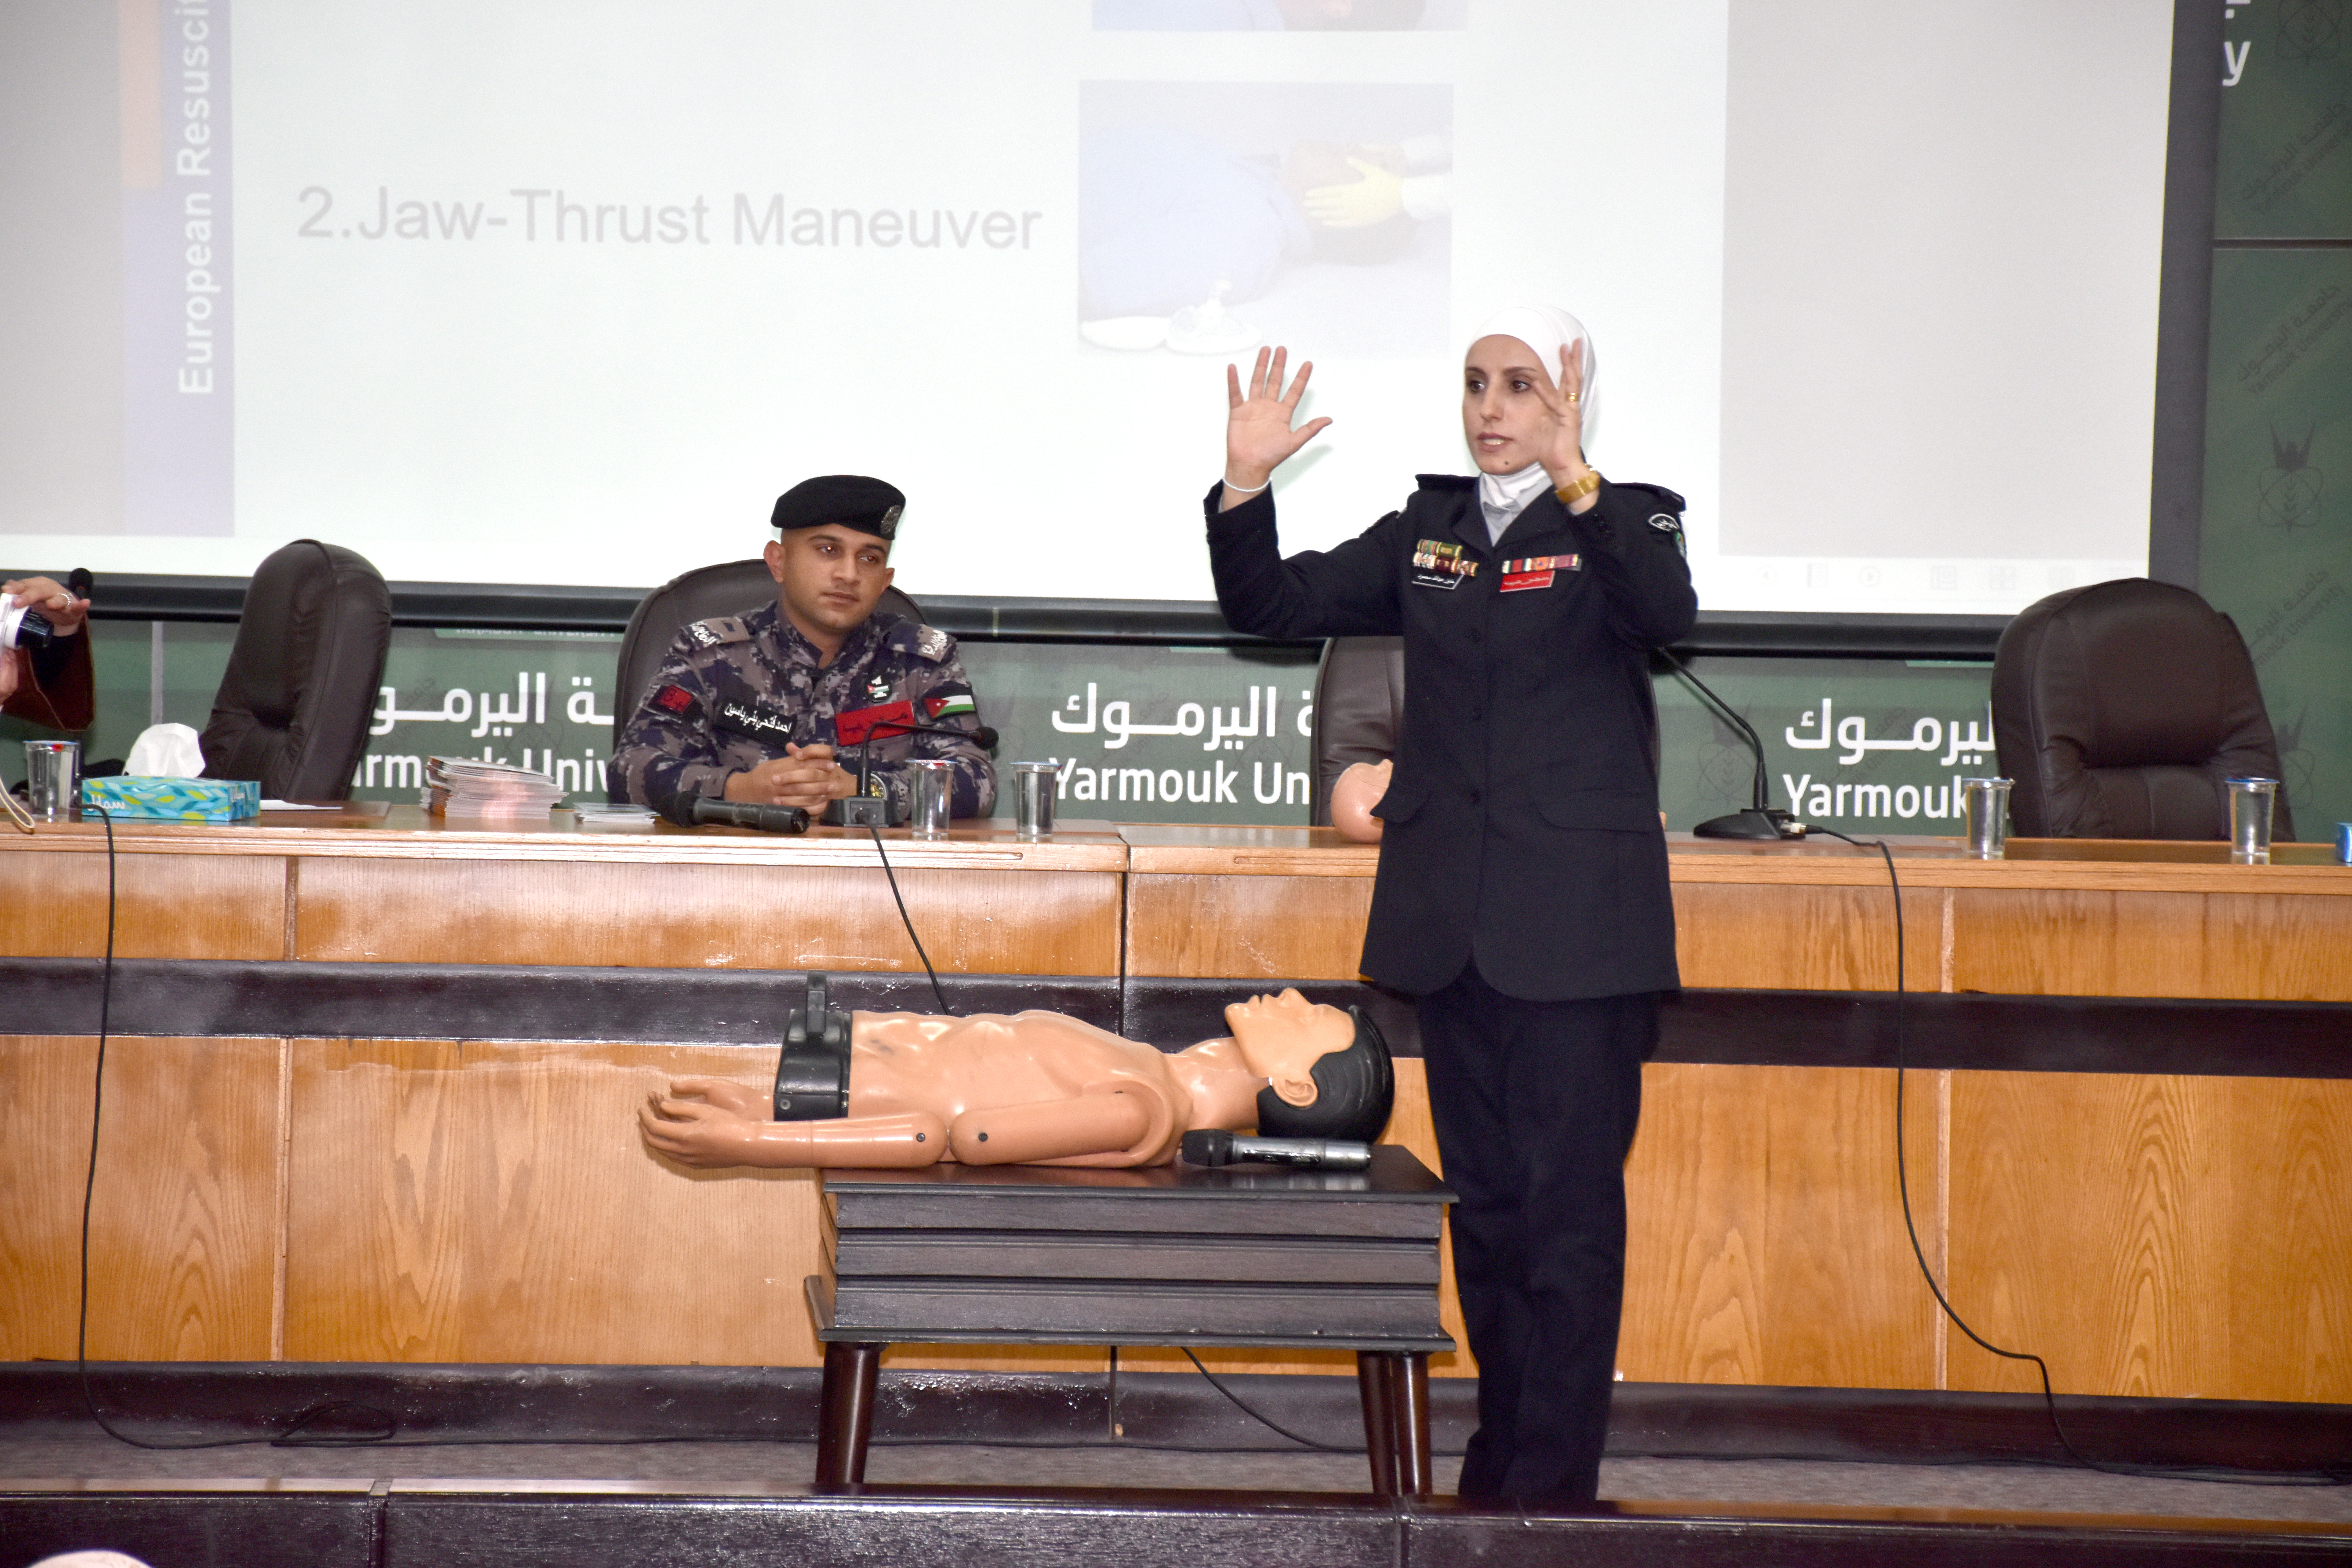 The Language Center Organizes a Training Workshop on First Aid and Public Safety for International Students